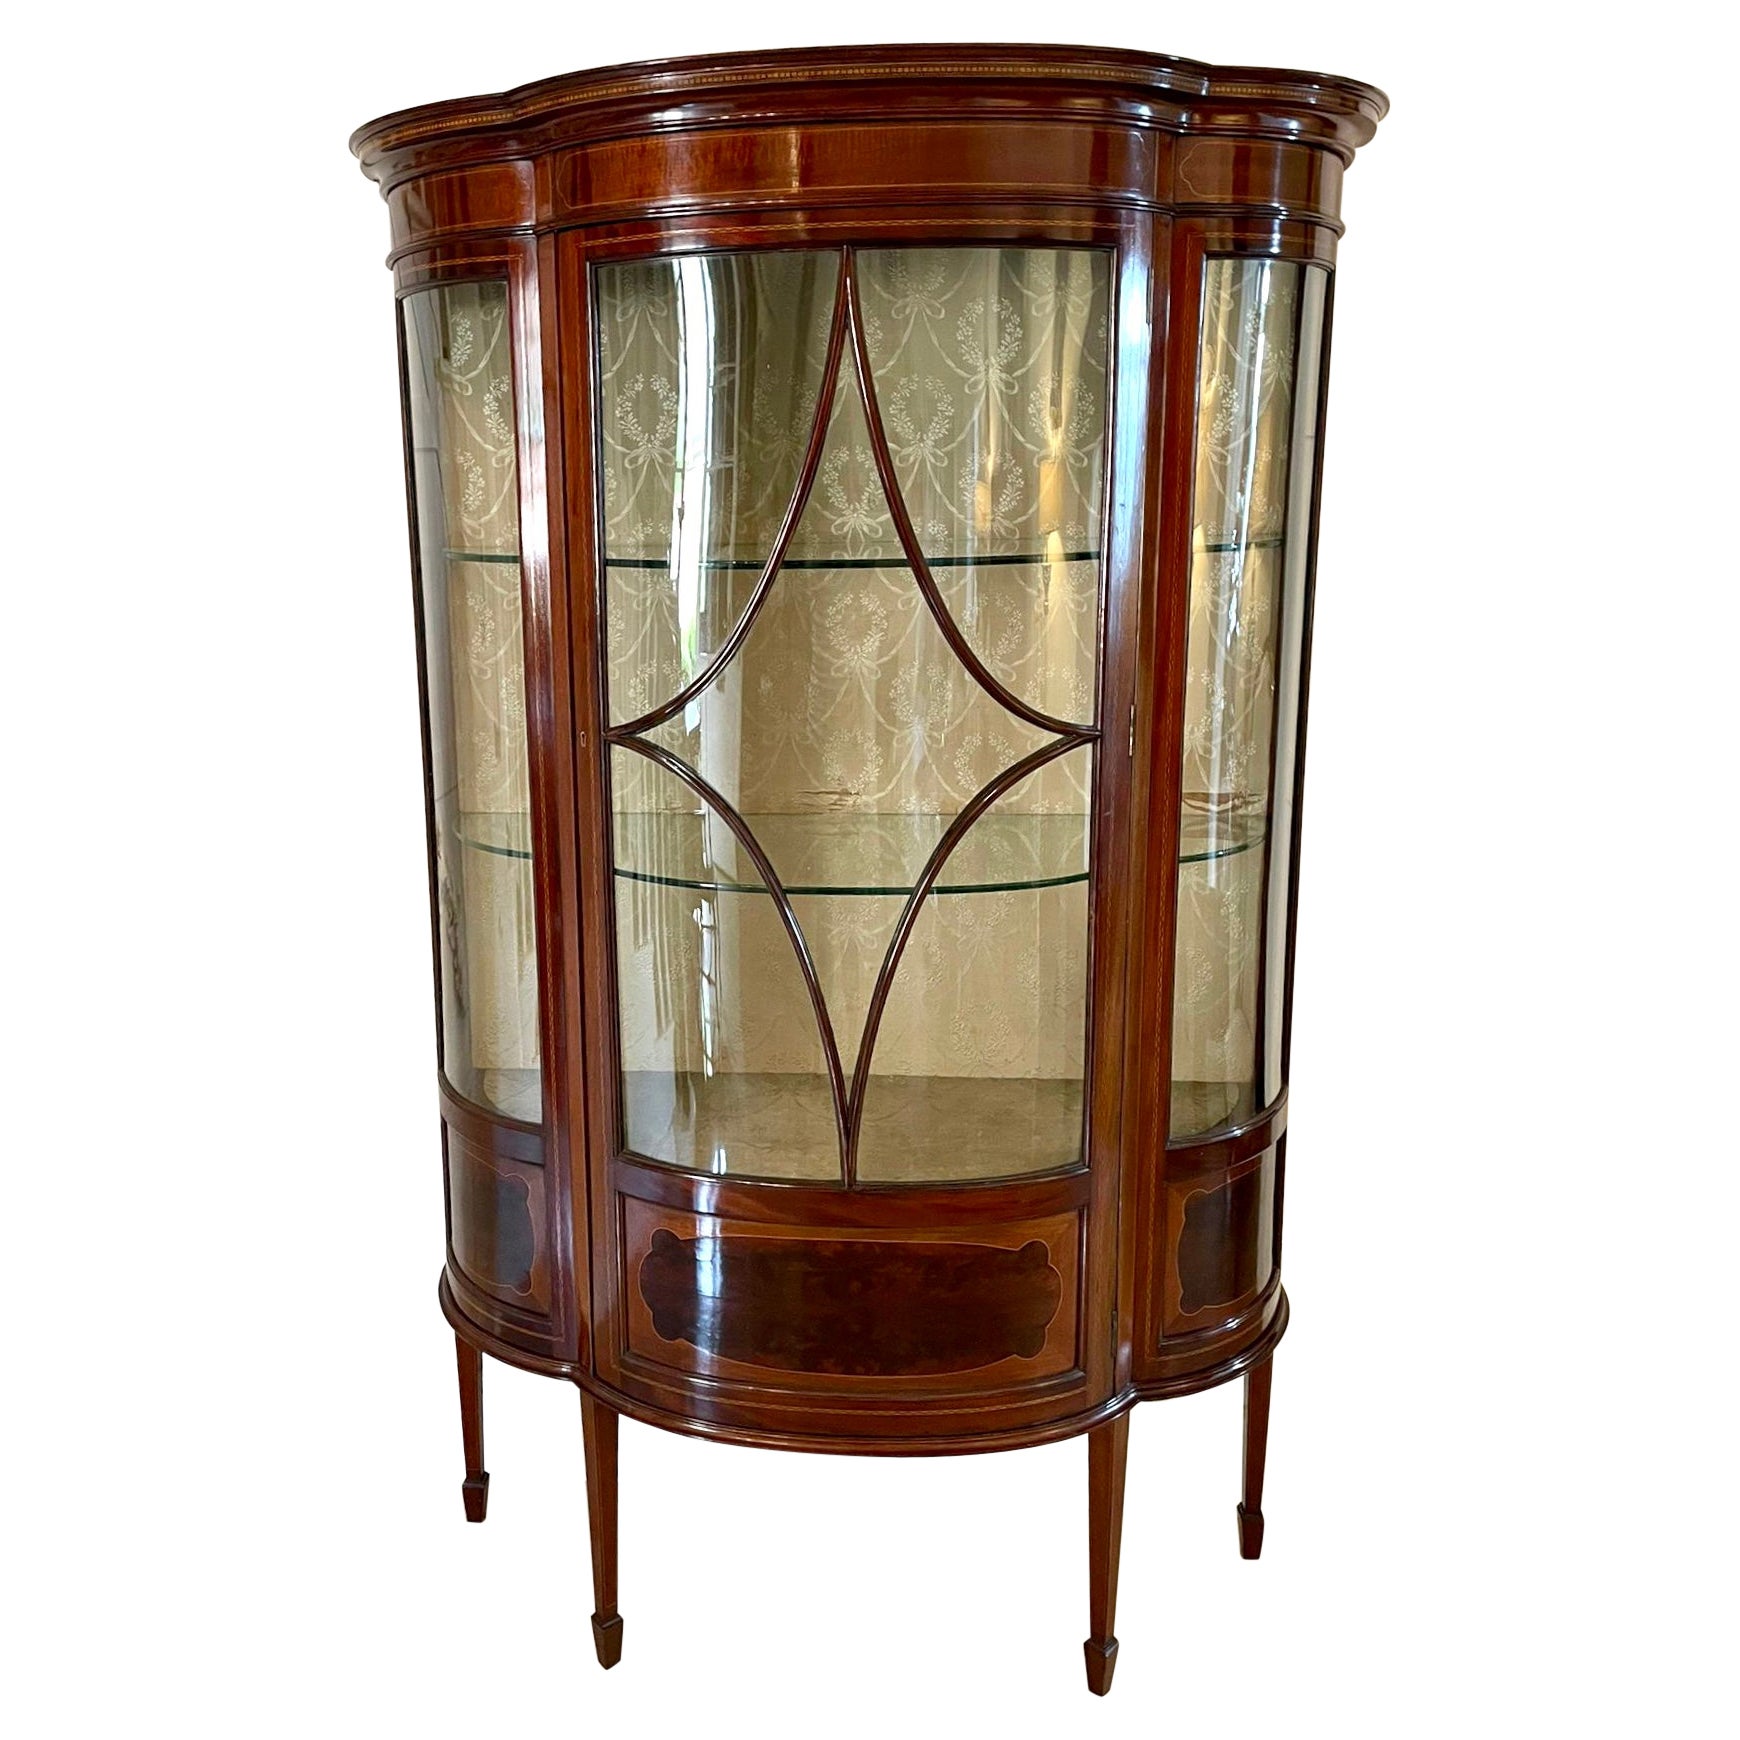 Fine Quality Antique Edwardian Inlaid Mahogany Shaped Display Cabinet For Sale